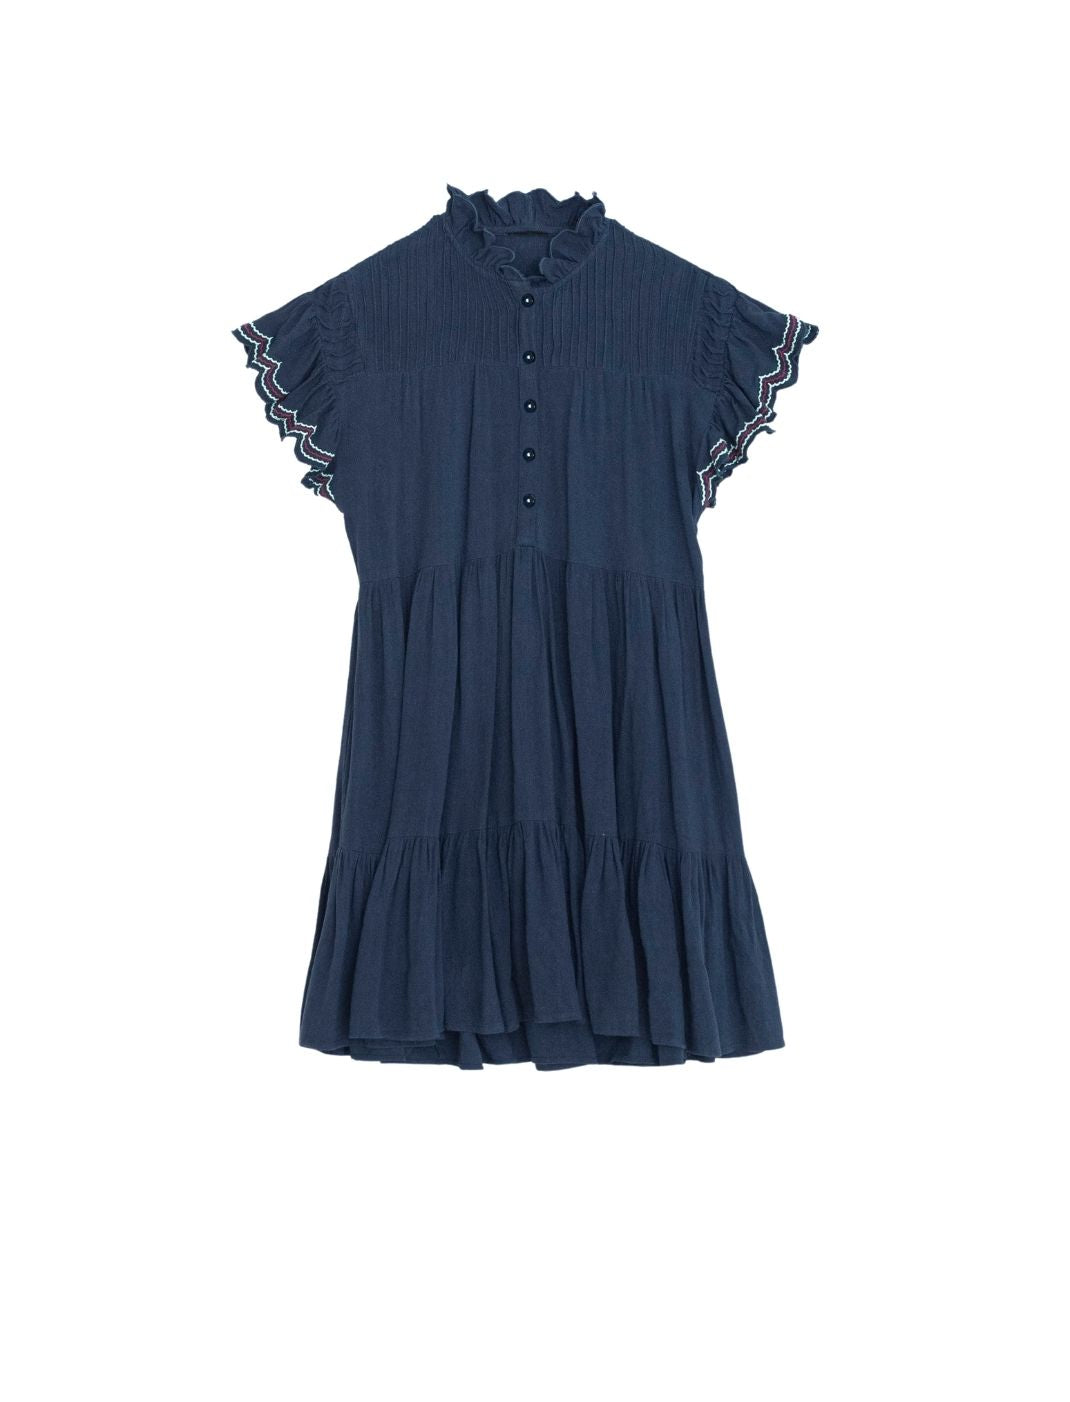 Women's blue dress with embroidered sleeves and buttons on front